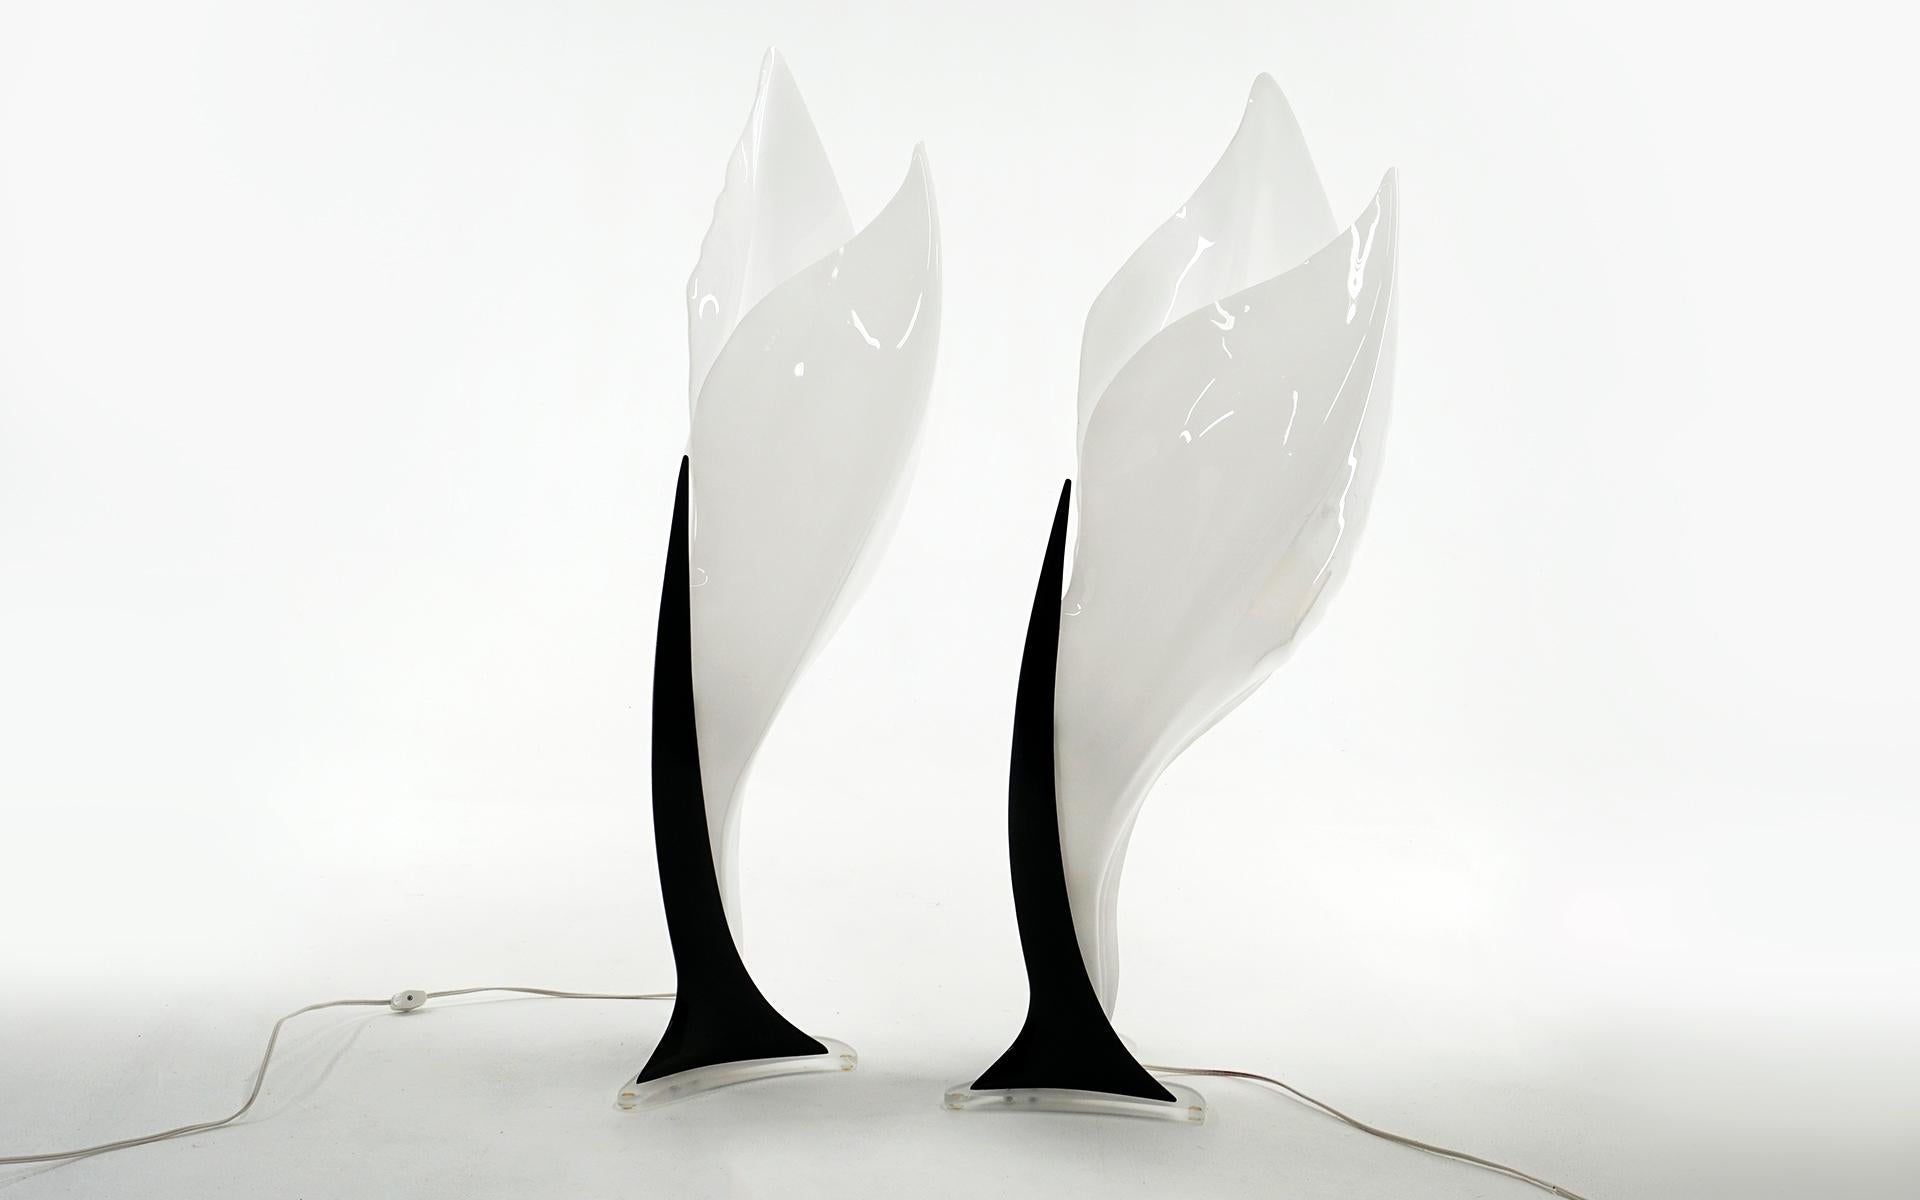 Pair of large table lamps by Roger Rougier, Canada, 1970s. White and Black Lucite / Acrylic. At thirty eight inches tall these are a stunning and striking pair. We have owned many Rougier lamps in the past and these are the best of the bunch. Both